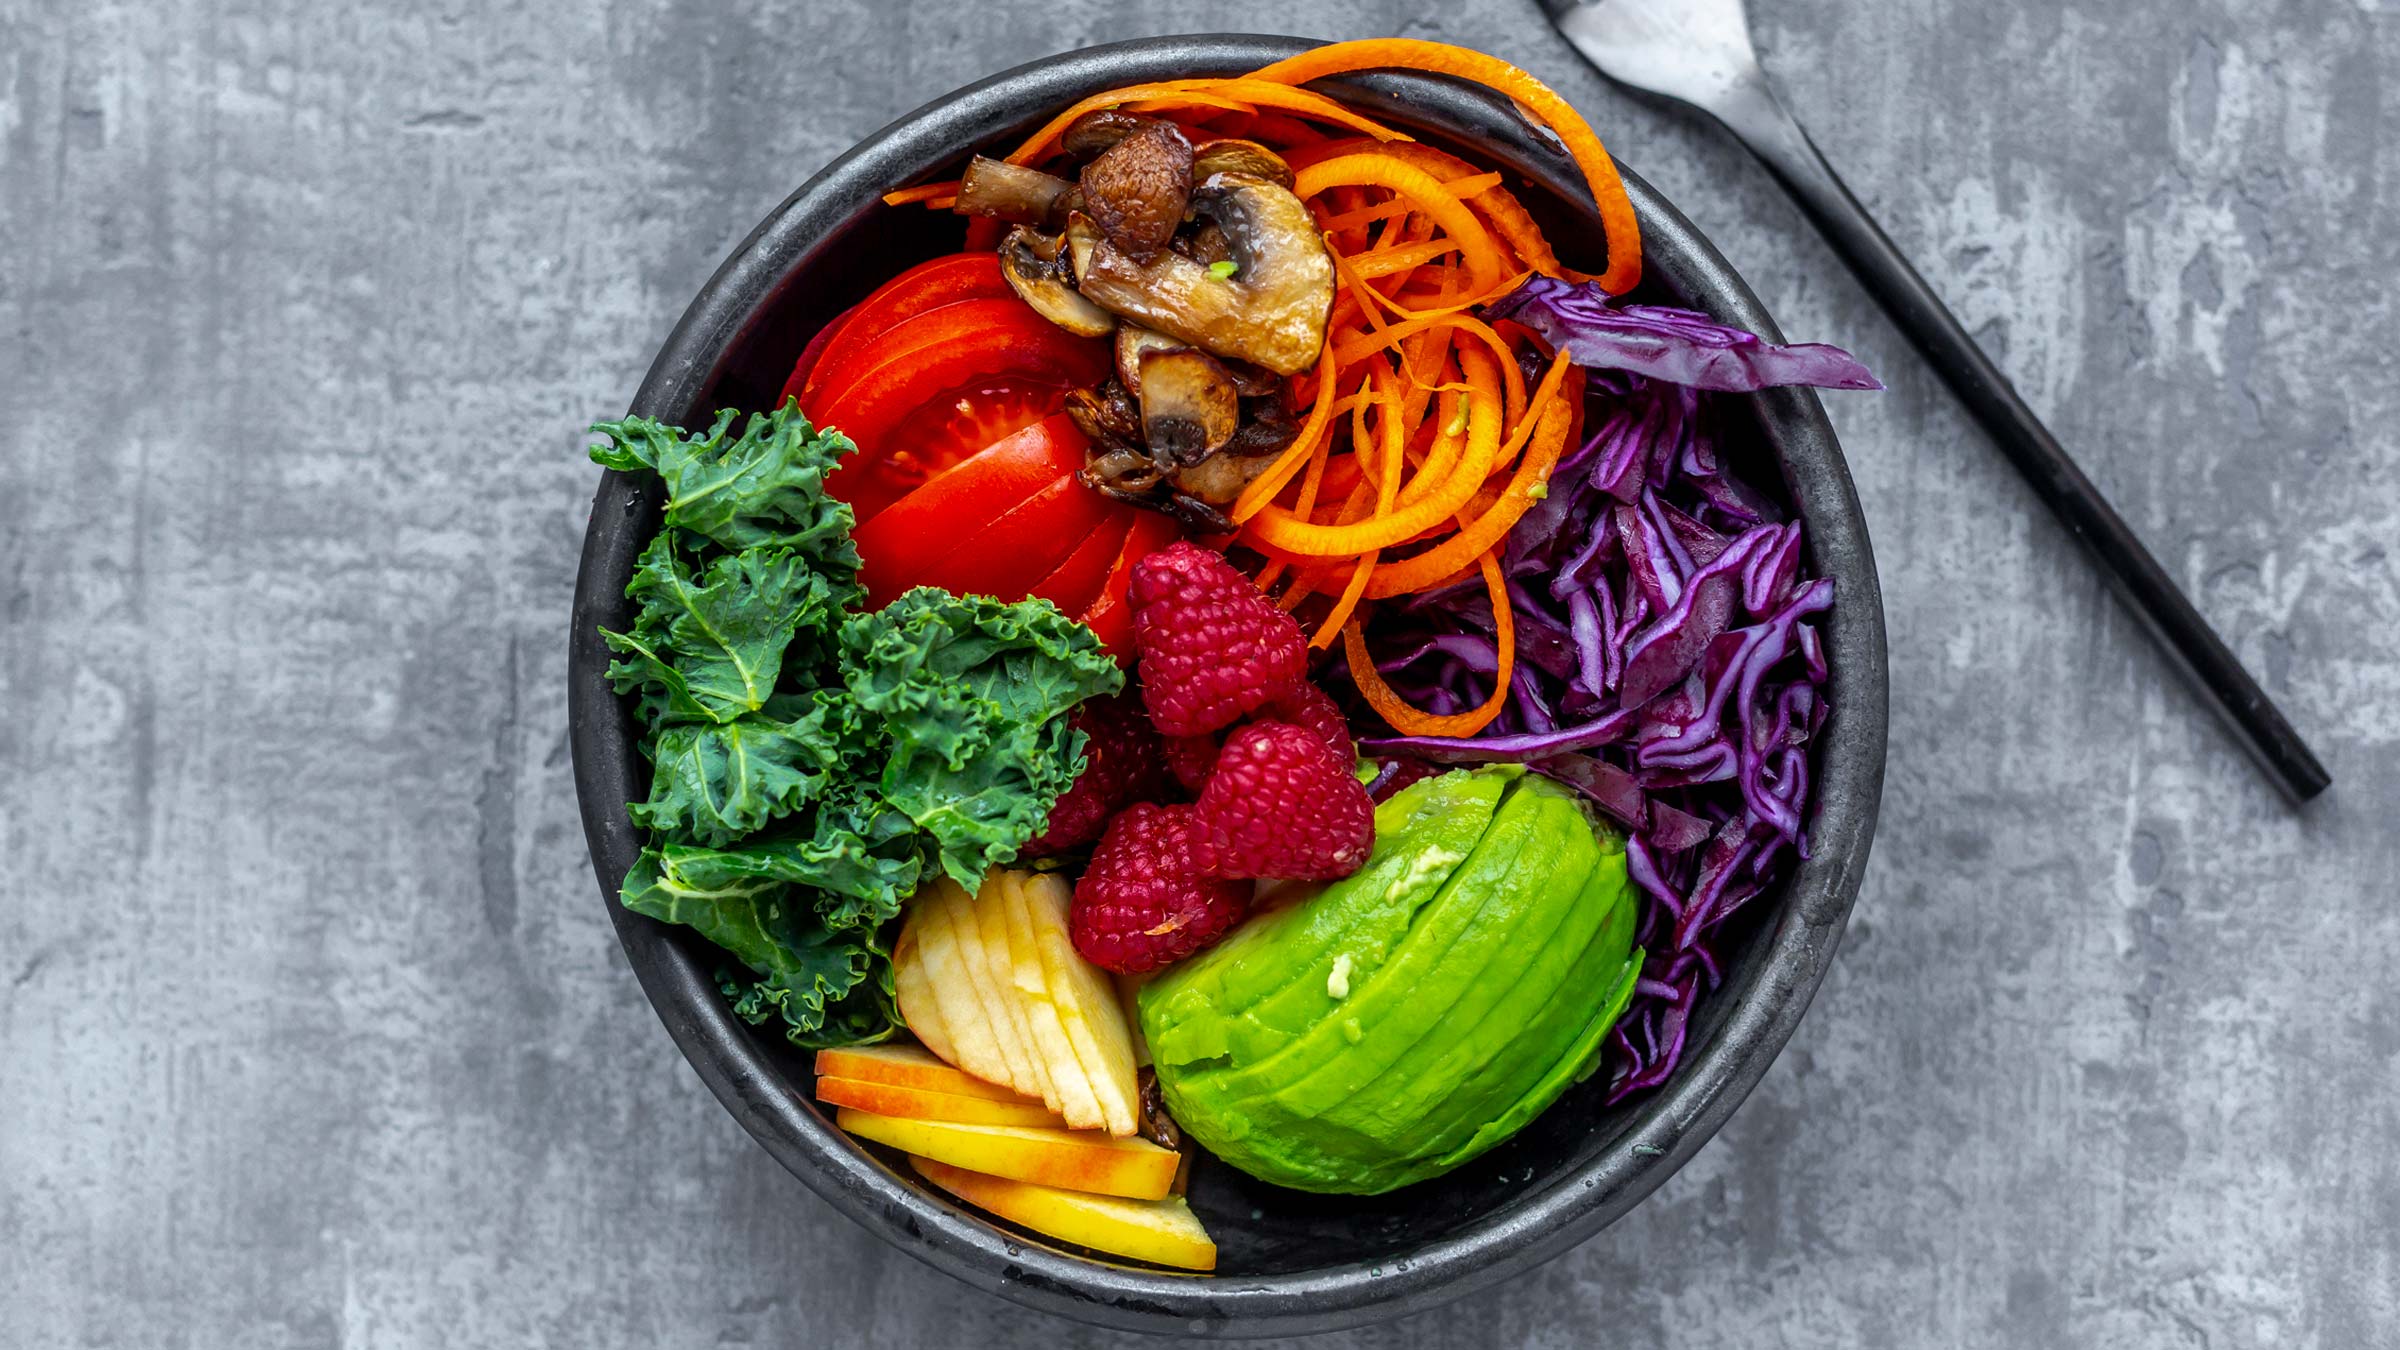 A fruit and vegetable salad in a bowl